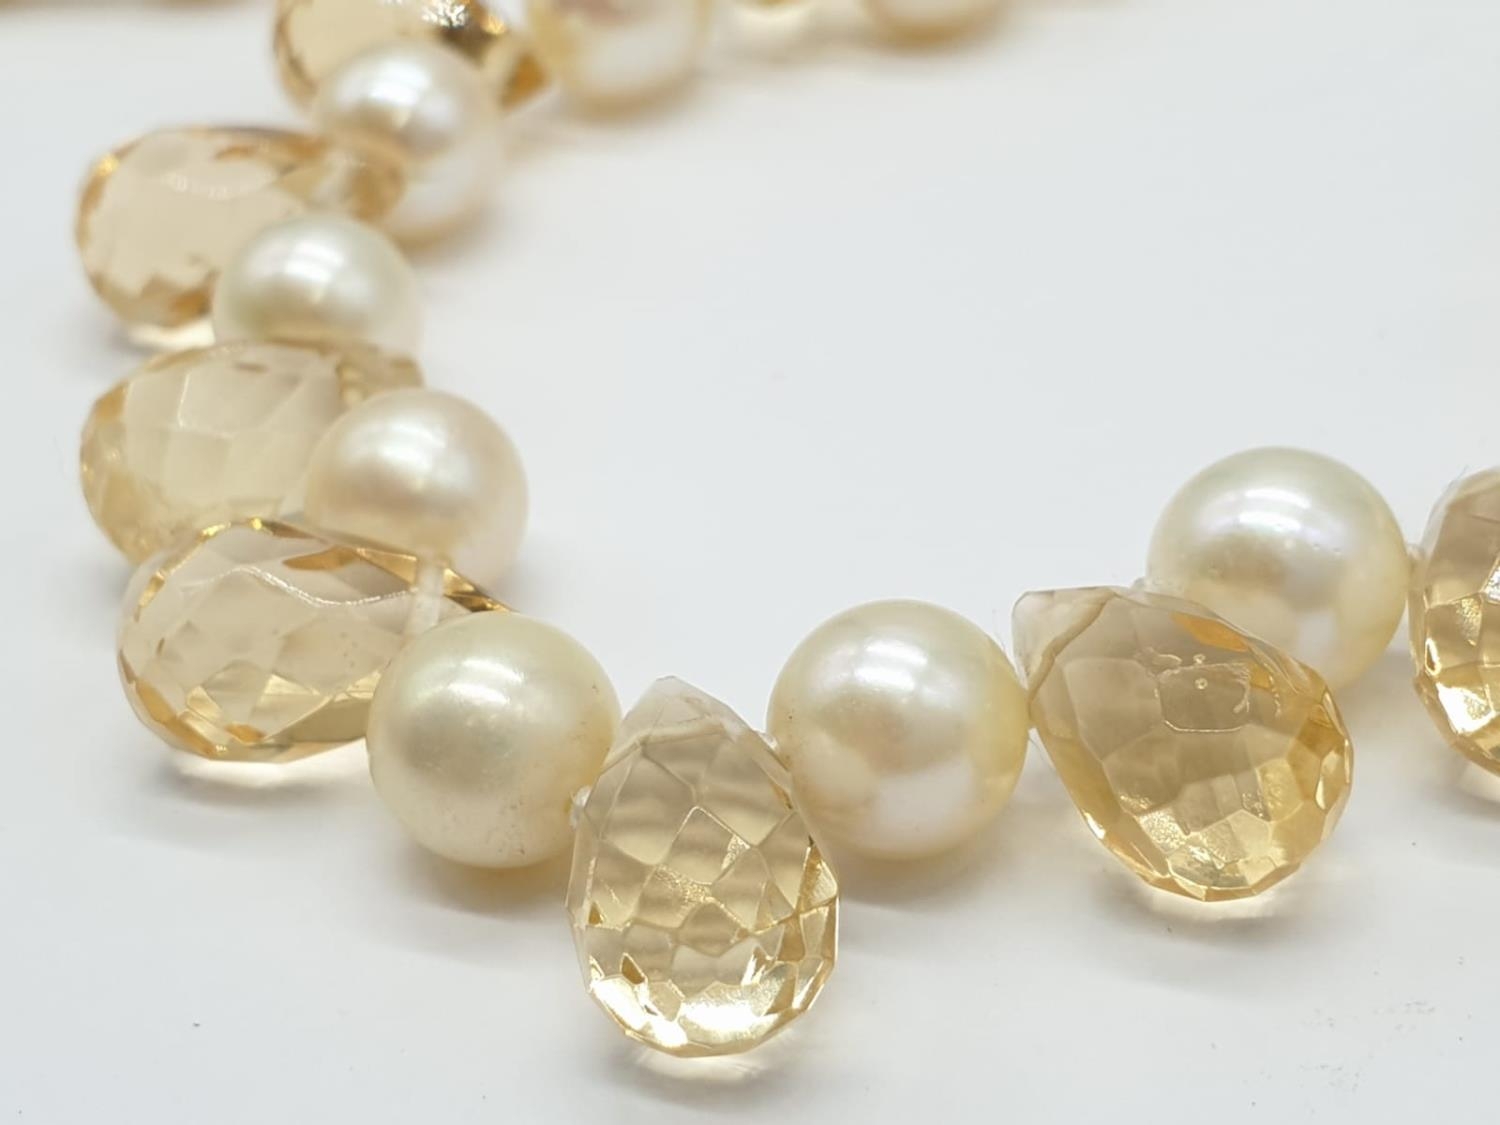 Citrine and Cultured Pearl NECKLACE with 9ct Gold Clasp. 40g 44cm - Image 3 of 4